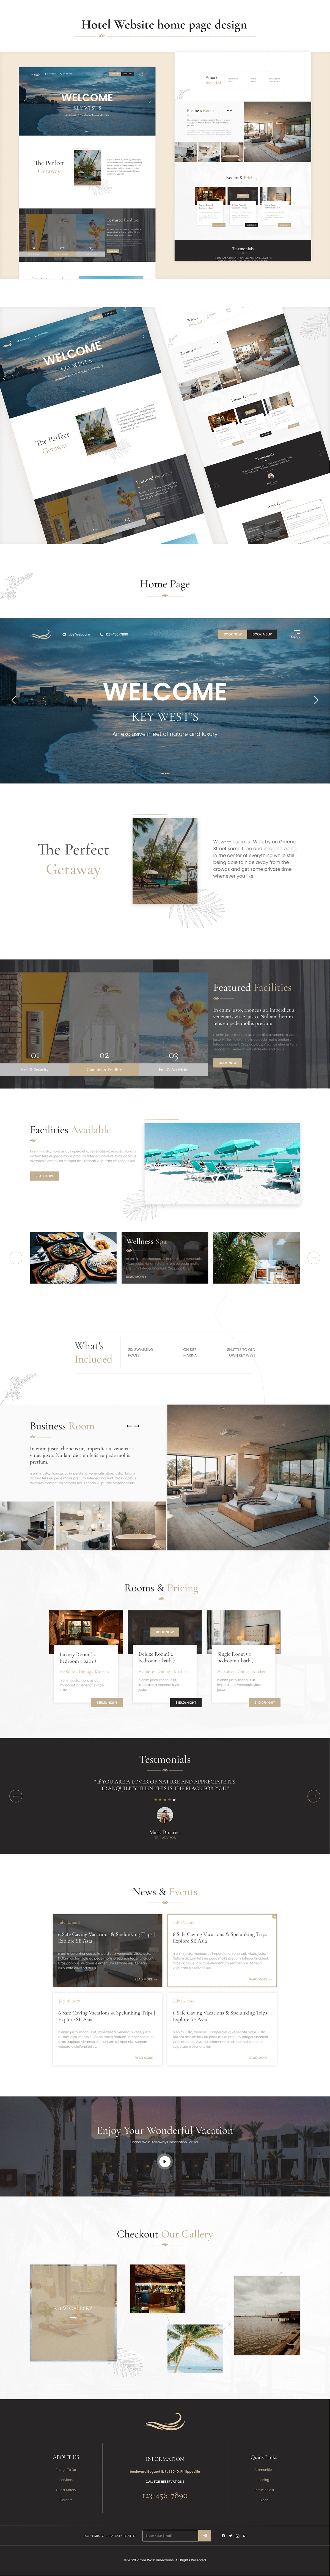 aavatto Booking web Booking Website Design hotel luxury room booking travel agency traveling UI/UX Web Design 